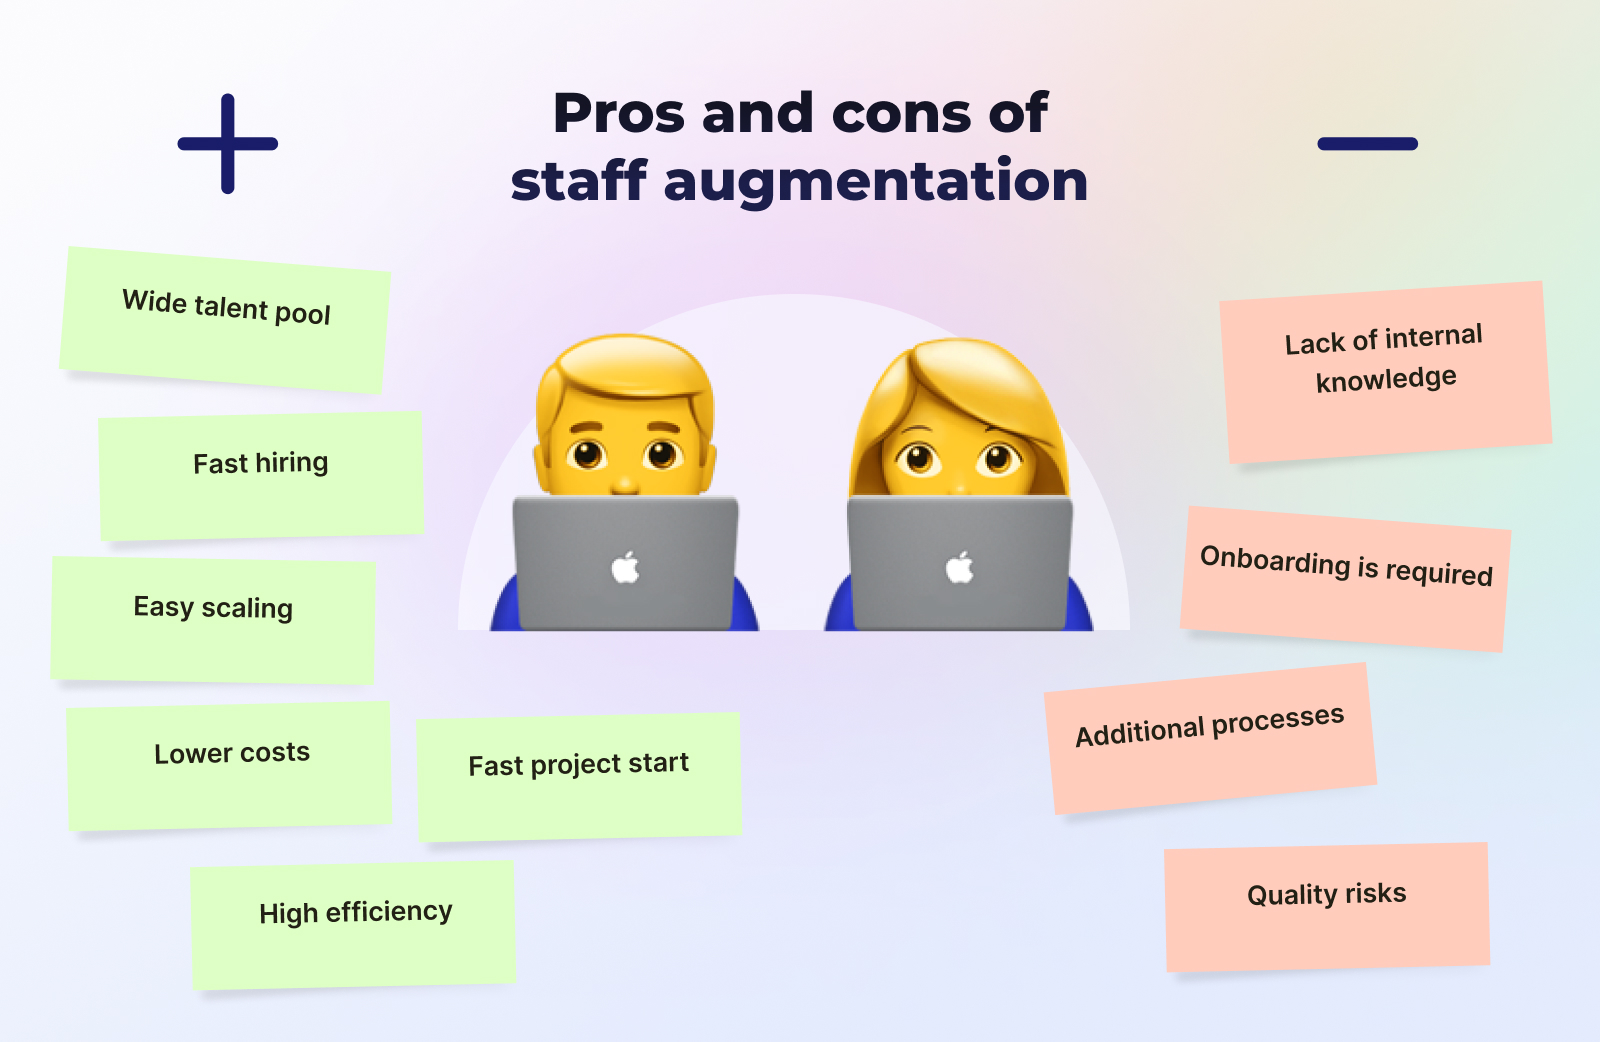 Pros and cons of staff augmentation